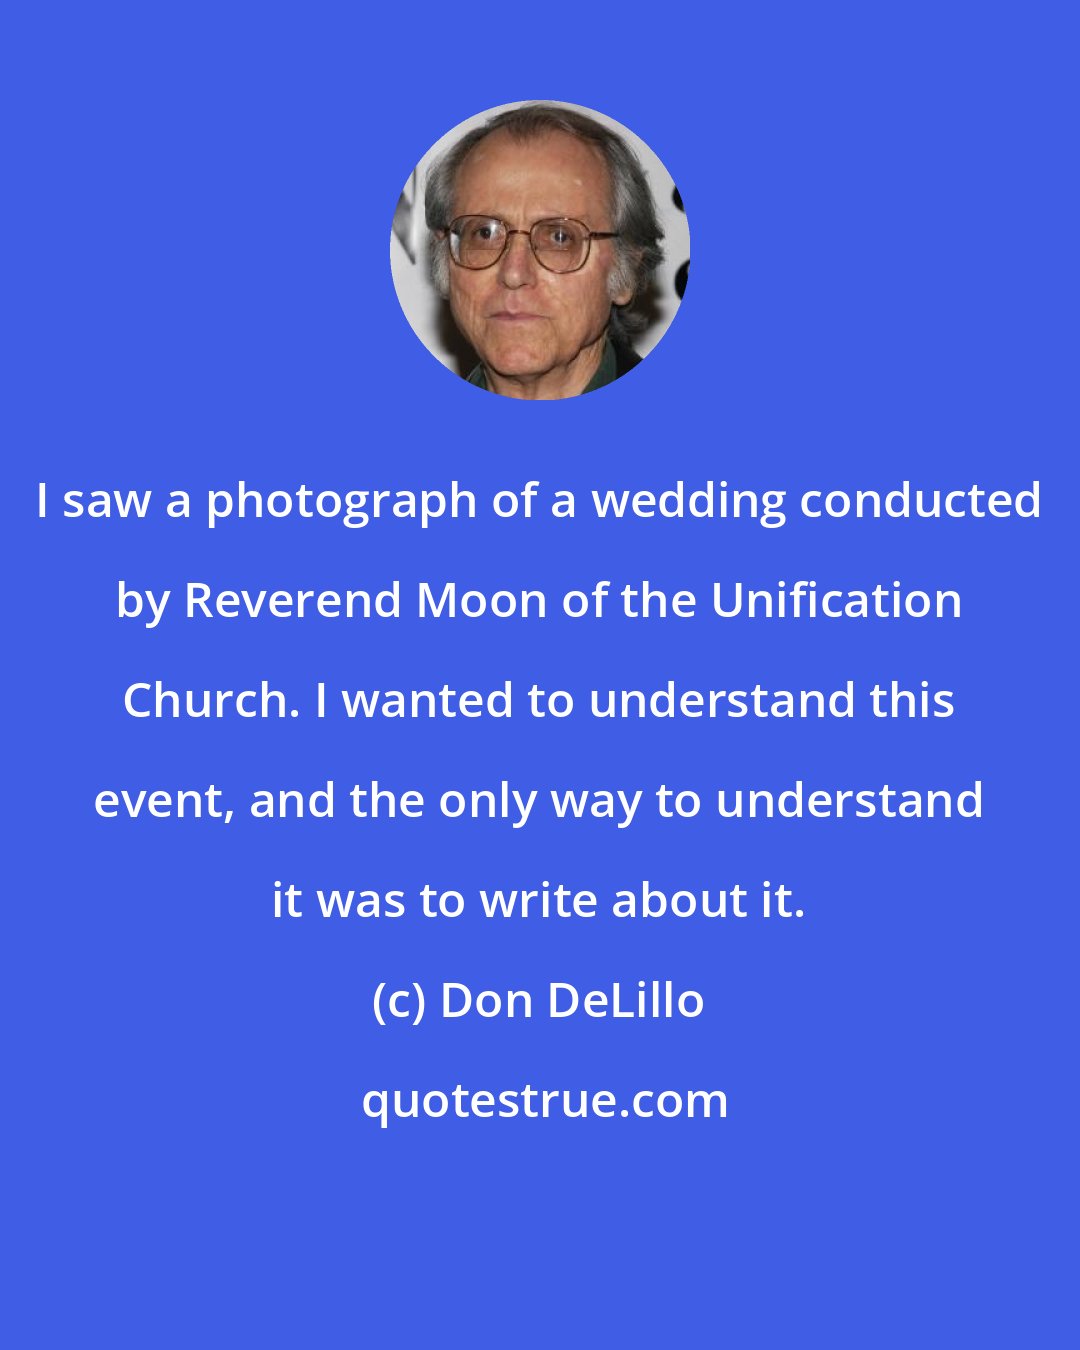 Don DeLillo: I saw a photograph of a wedding conducted by Reverend Moon of the Unification Church. I wanted to understand this event, and the only way to understand it was to write about it.